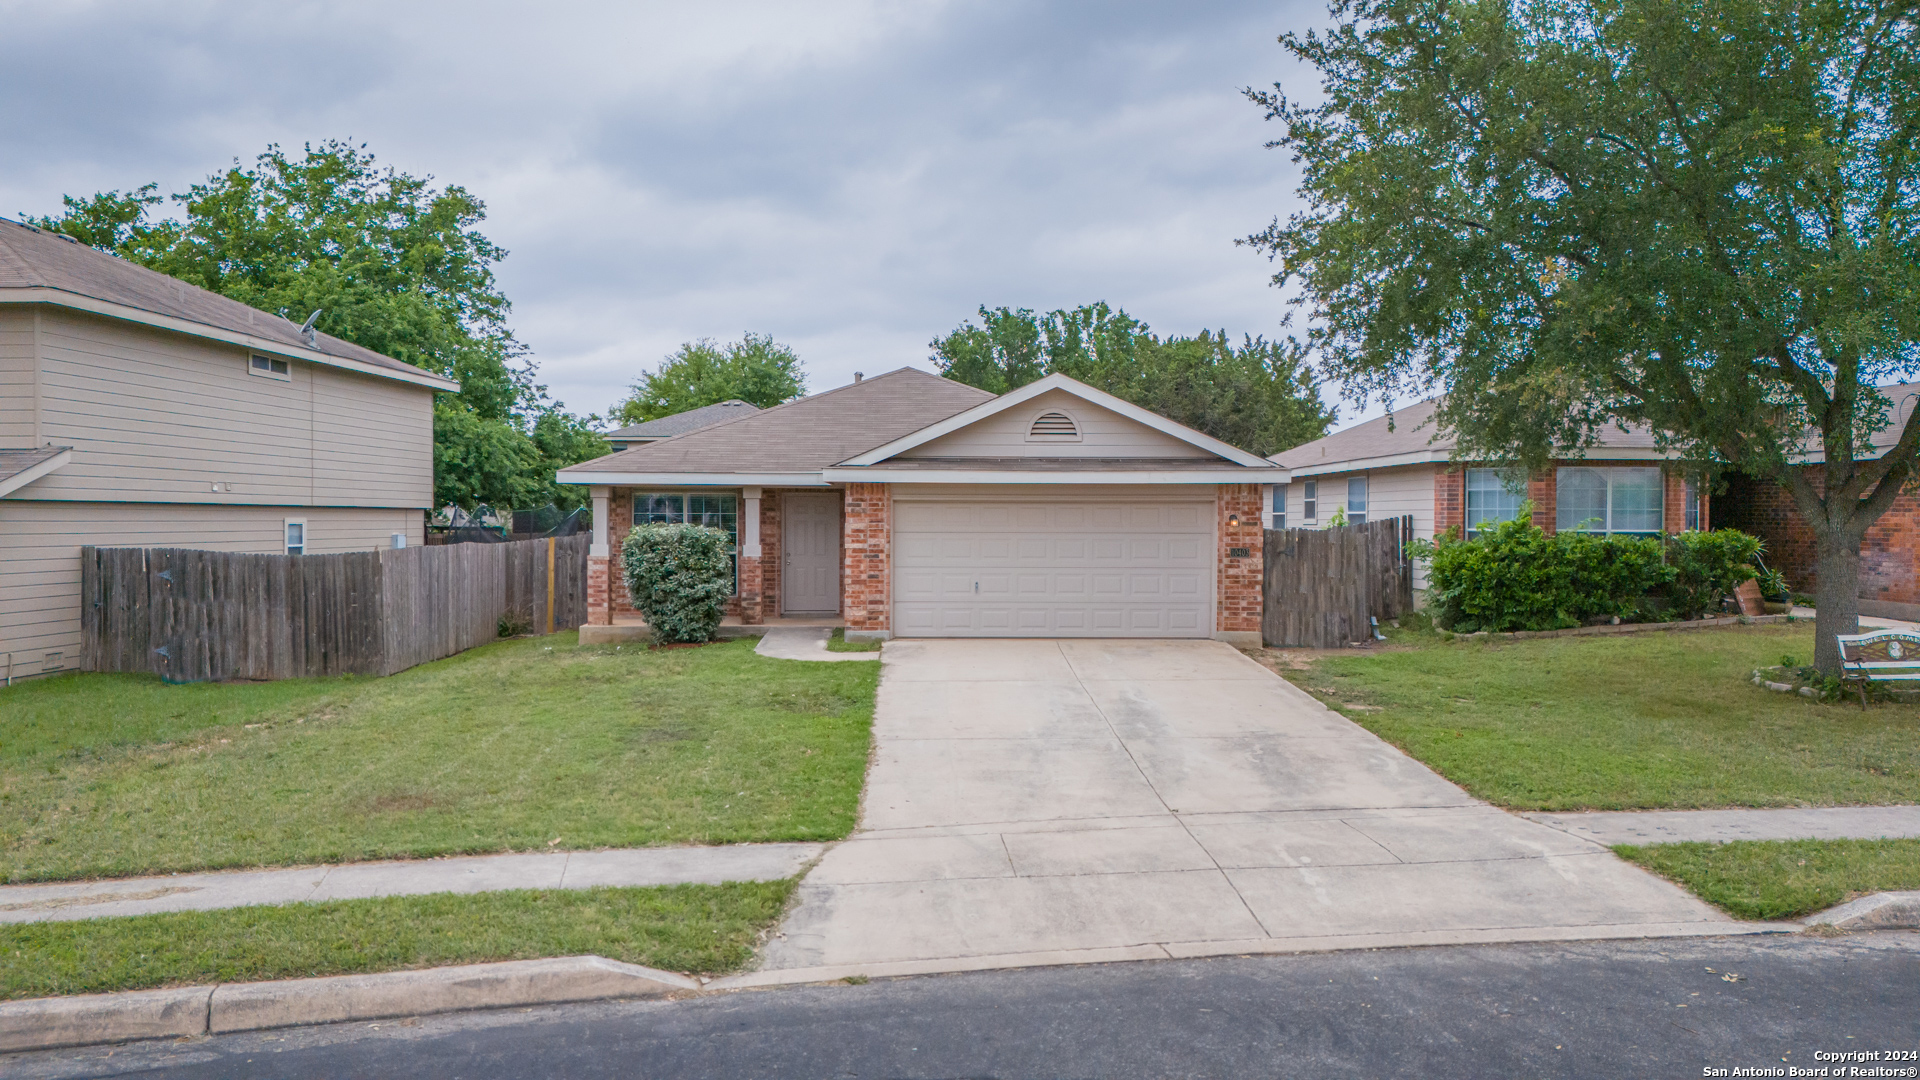 Photo of 10403 Artesia Wls in Universal City, TX